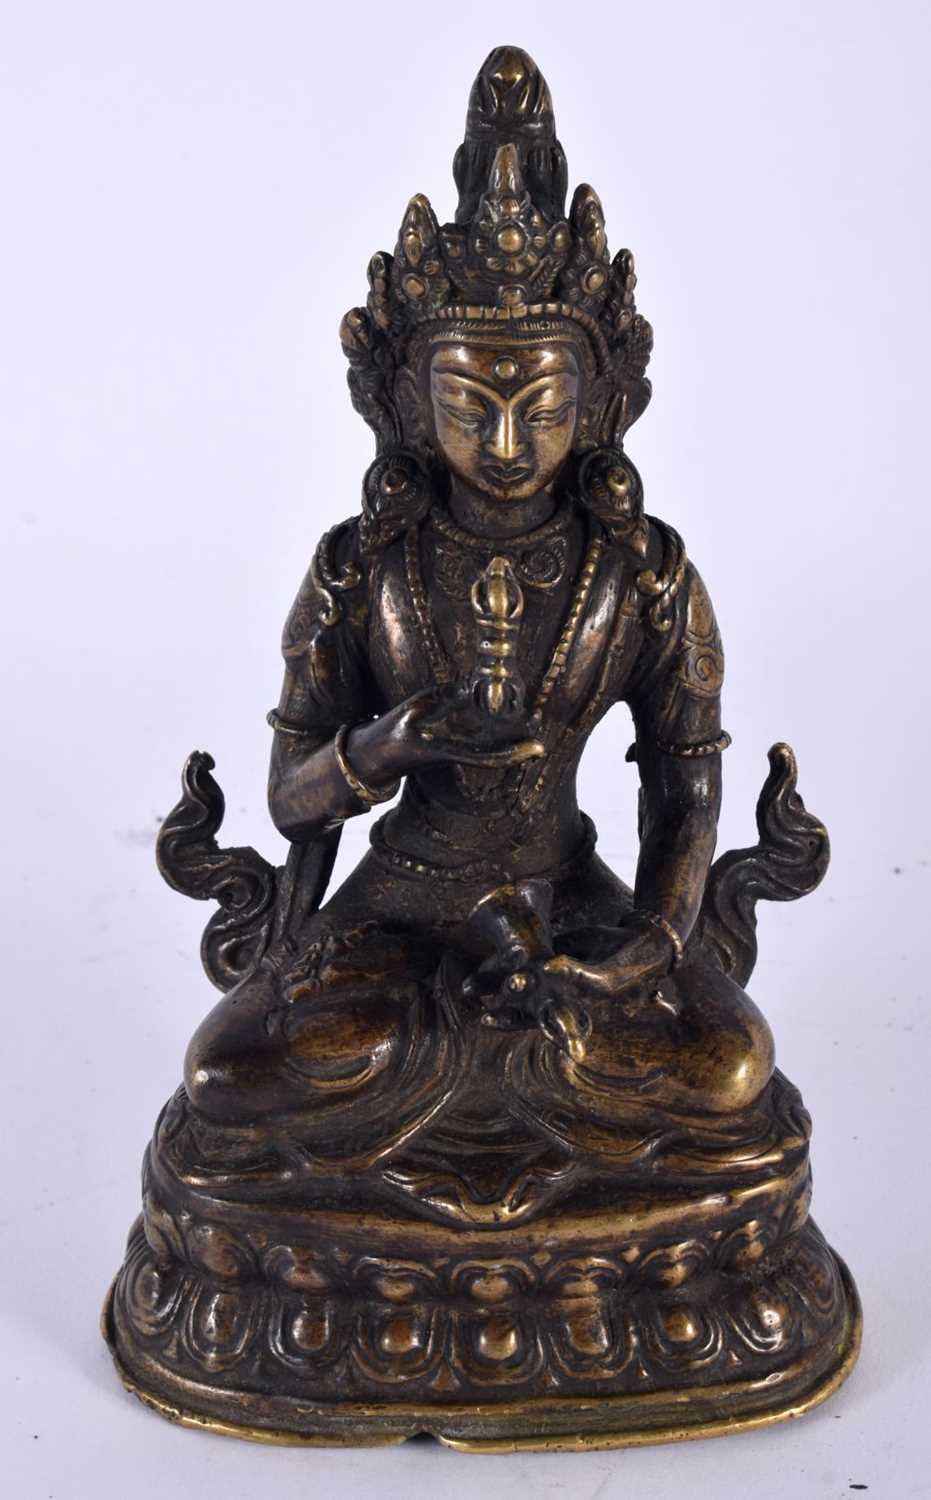 A 19TH CENTURY TIBETAN NEPALESE BRONZE FIGURE OF A SEATED BUDDHA modelled upon a triangular lotus